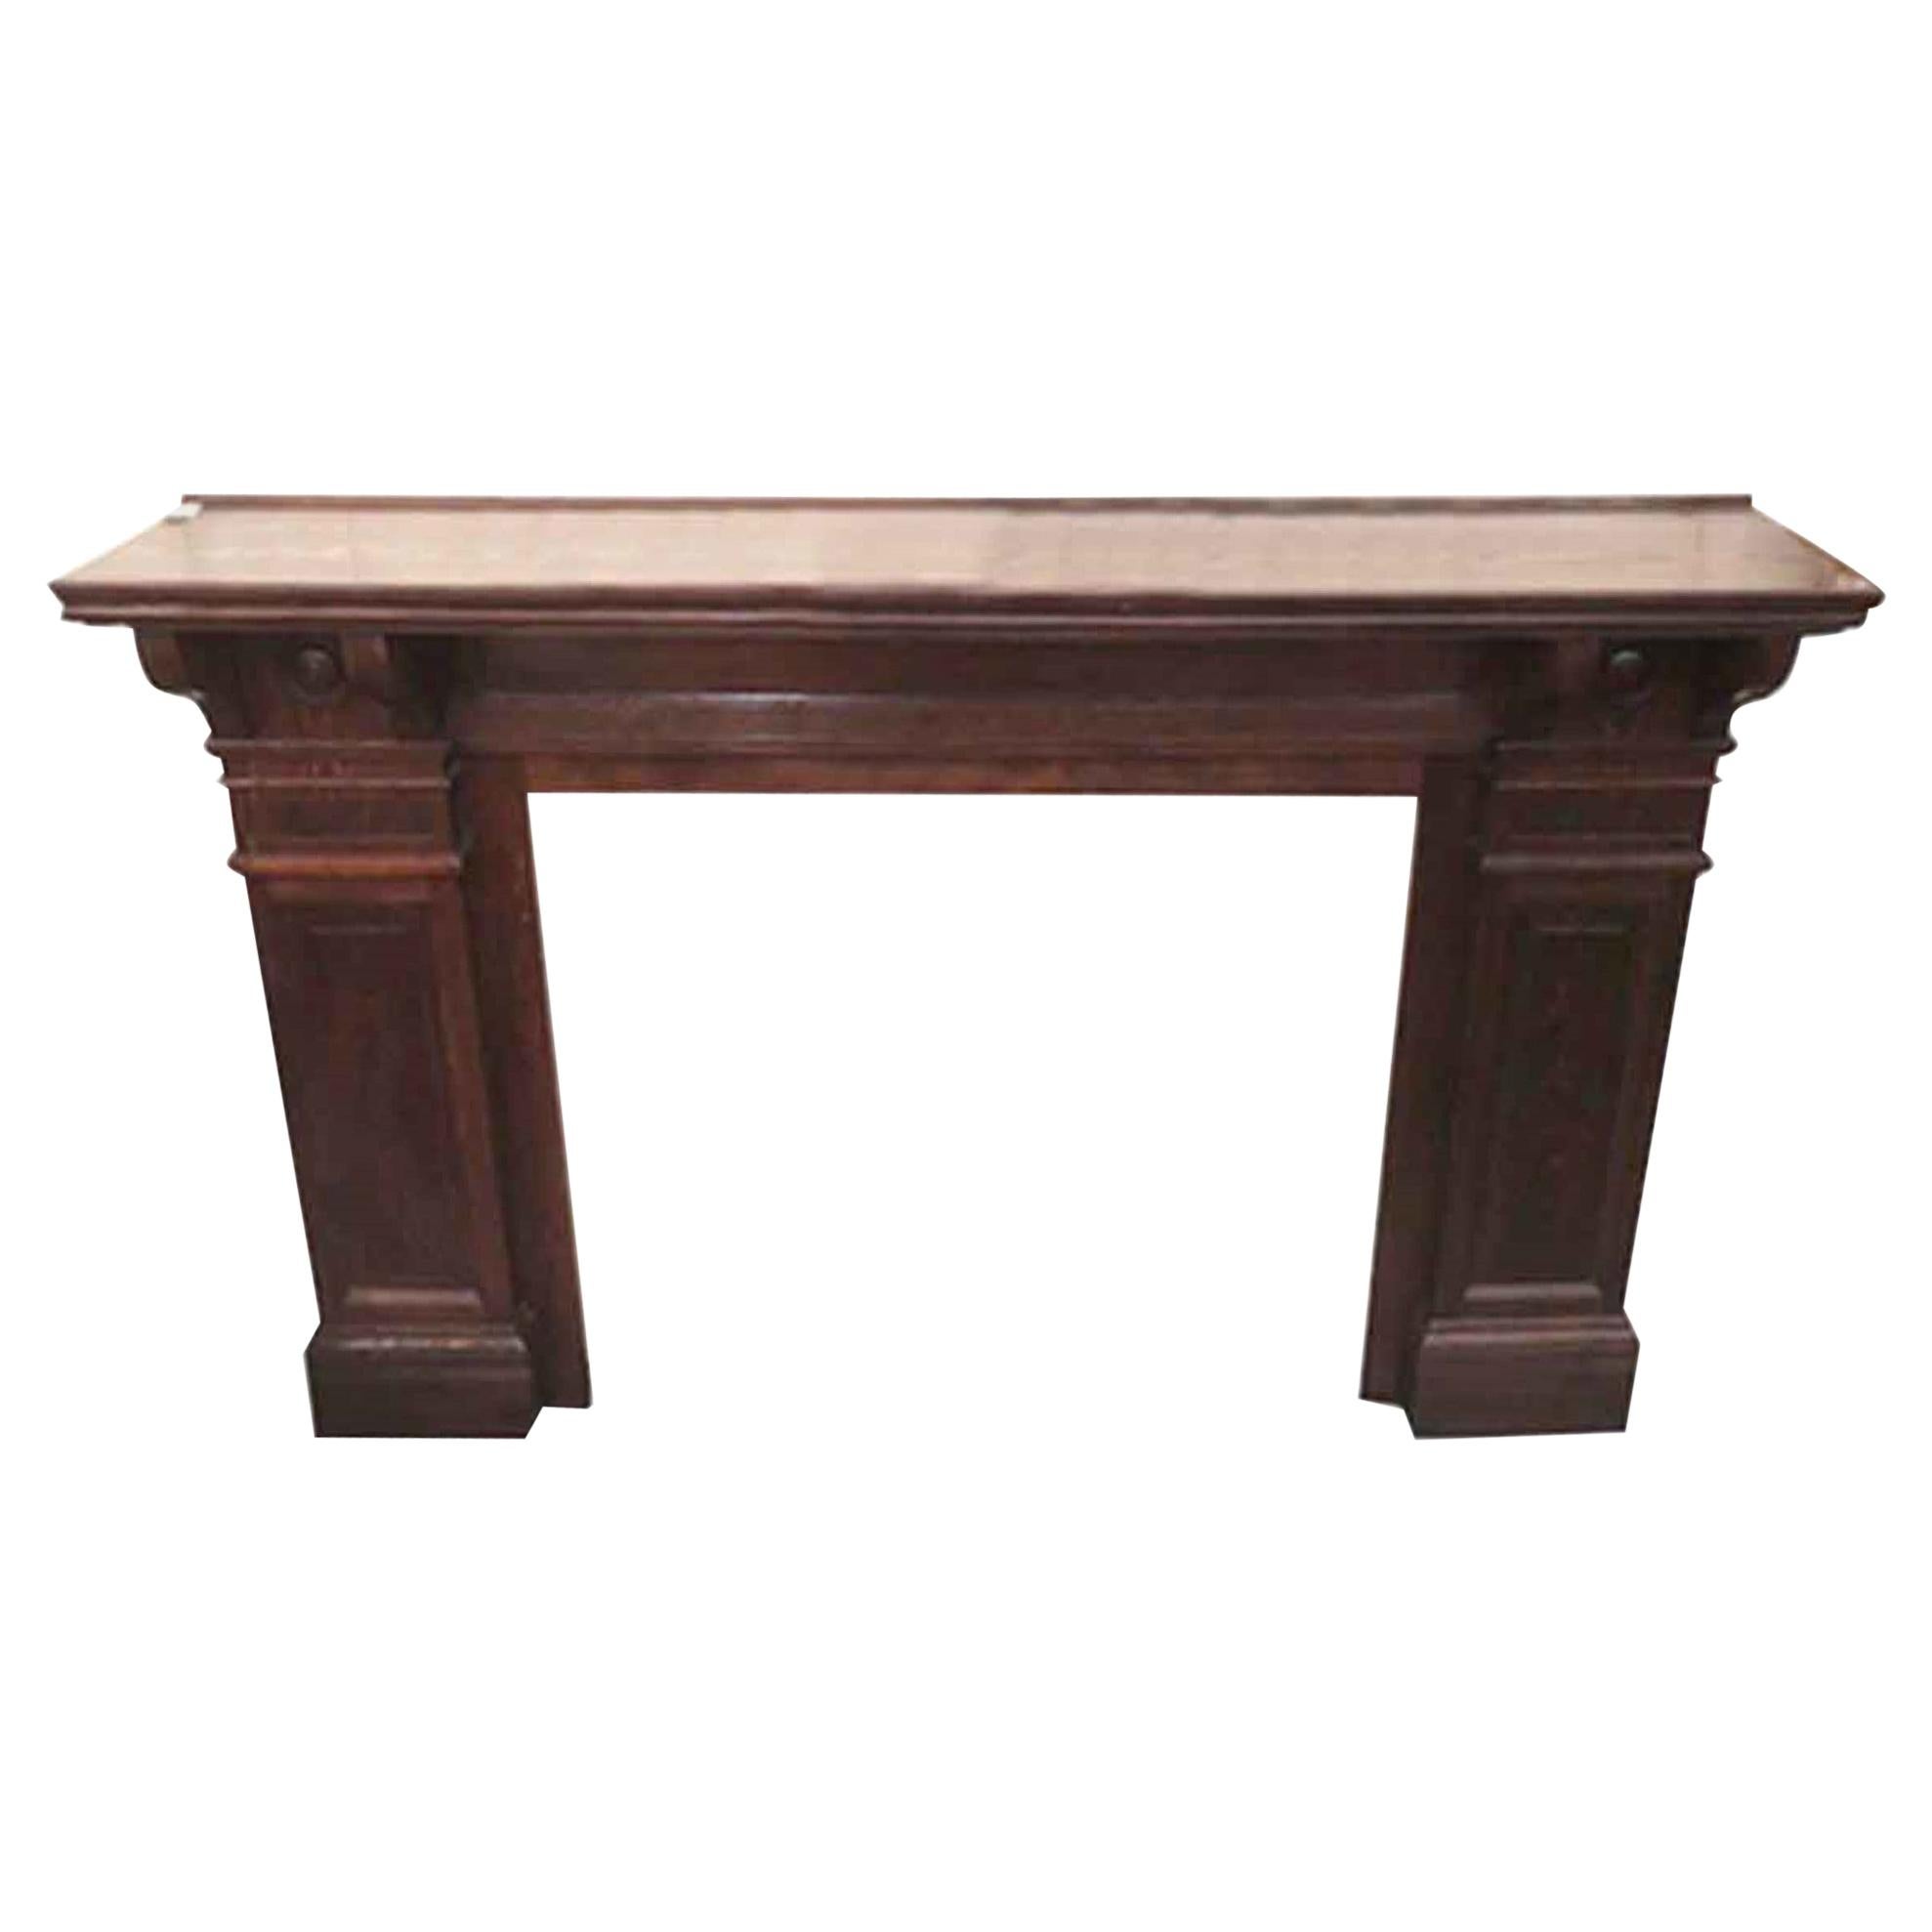 1920s Oak Mantel with Dark Stain and Bulls Eye Details from W. 85th St Manhattan